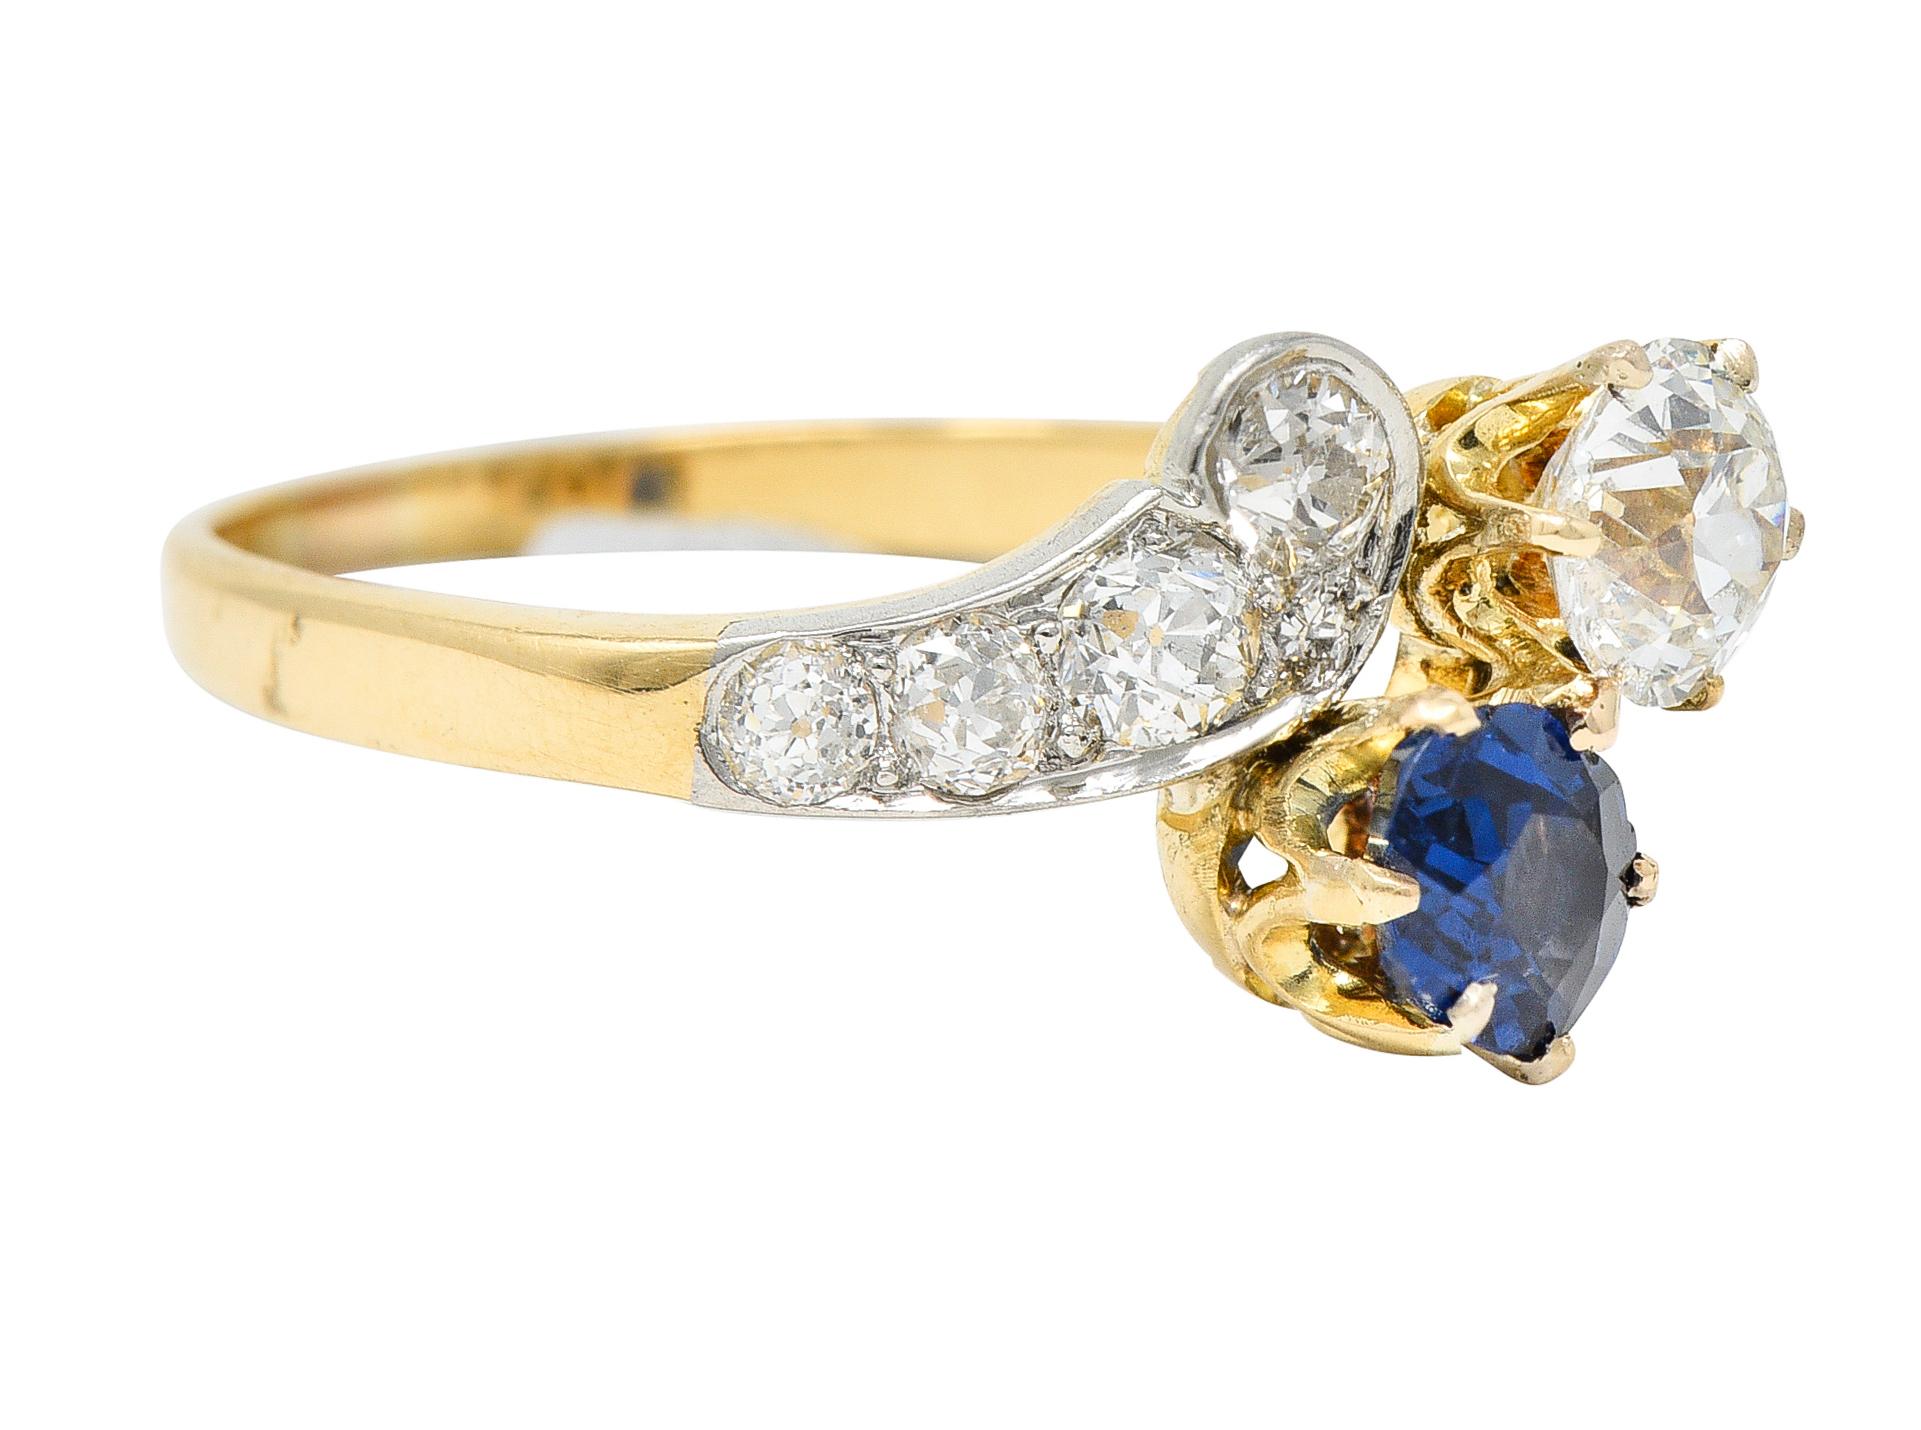 Bypass ring centers two gemstones in the Toi et Moi style - French to mean 'You and Me'

One being an oval cut sapphire weighing approximately 0.55 carat - vividly royal blue in color

With an old European cut diamond weighing approximately 0.55